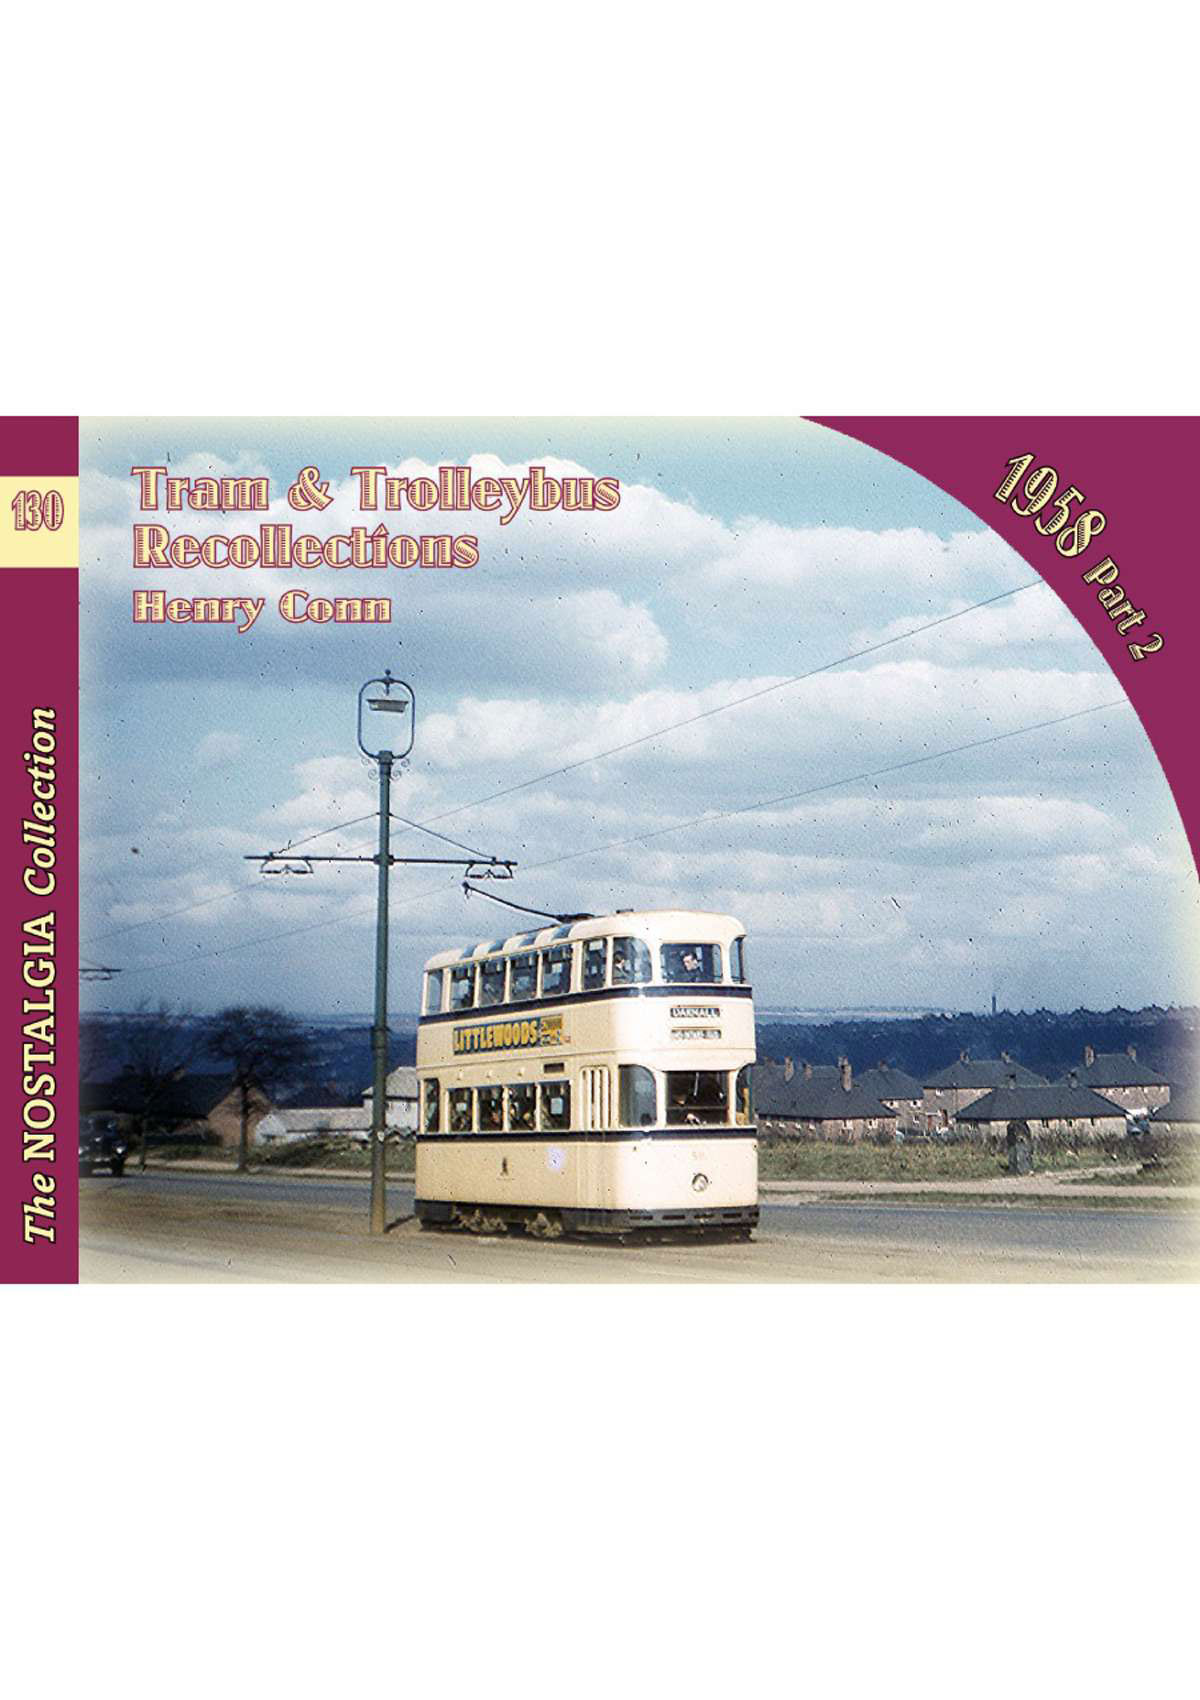 Tram & Trolleybus Recollections 1958 Part 2